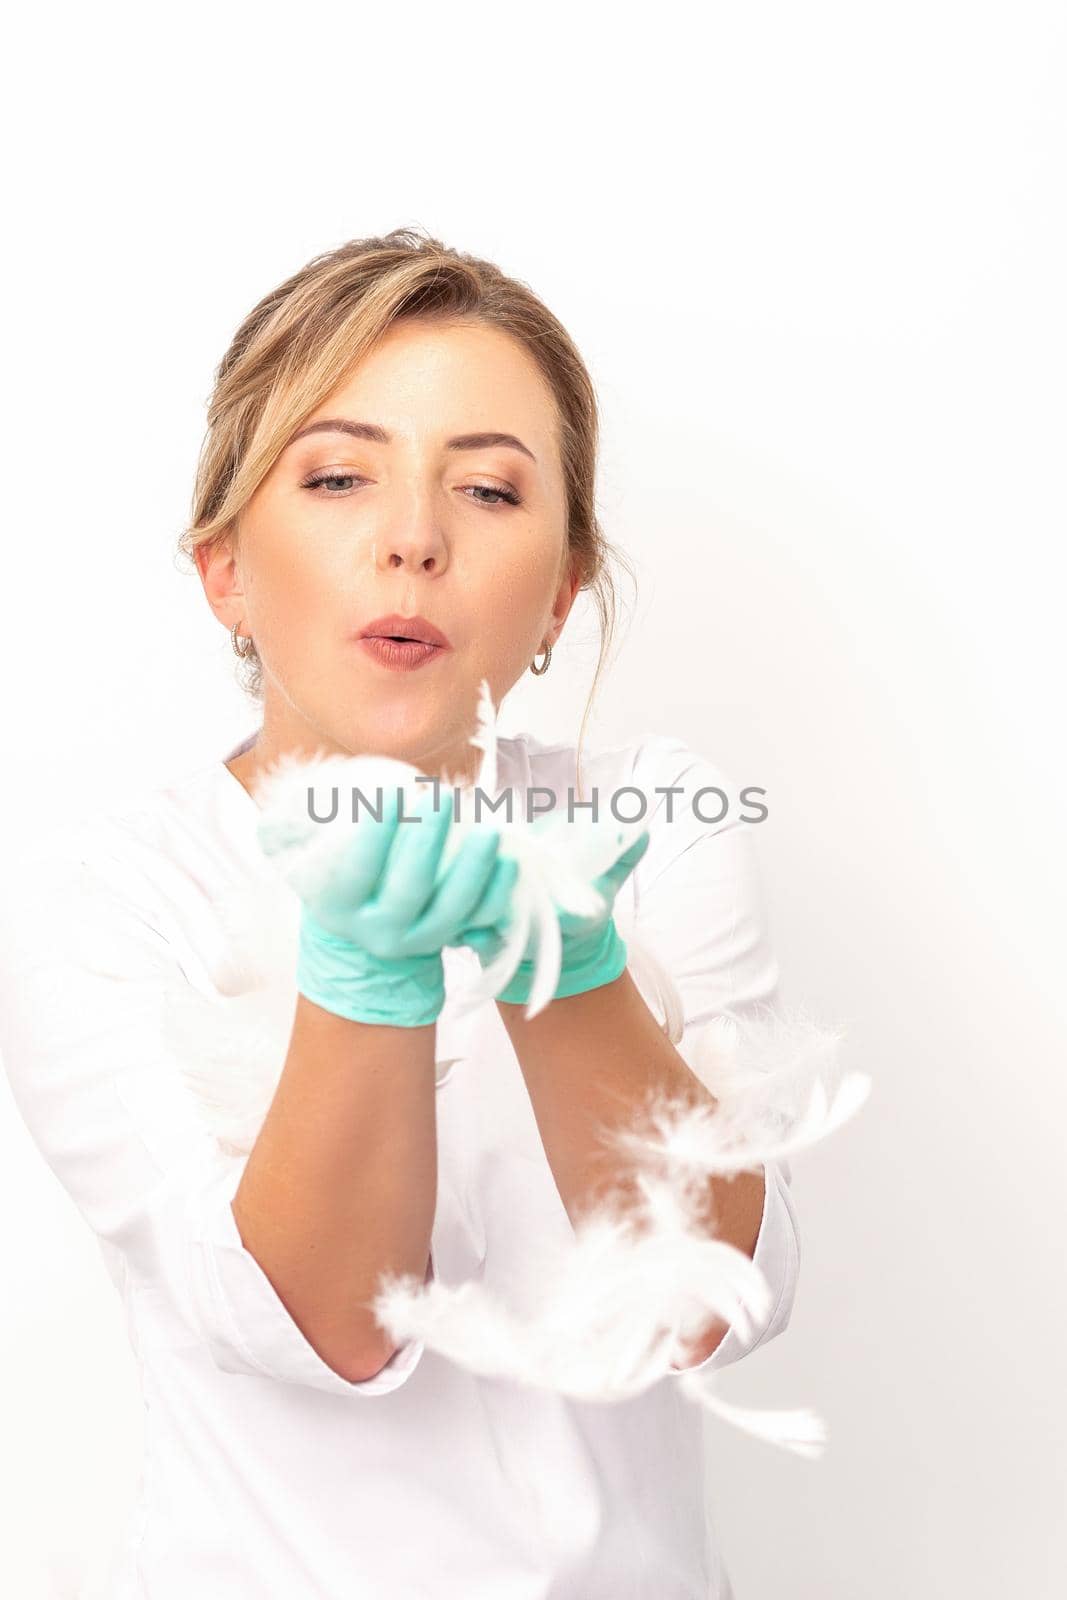 Young beautiful woman beautician in protective green gloves standing and blowing on feathers over white wall background